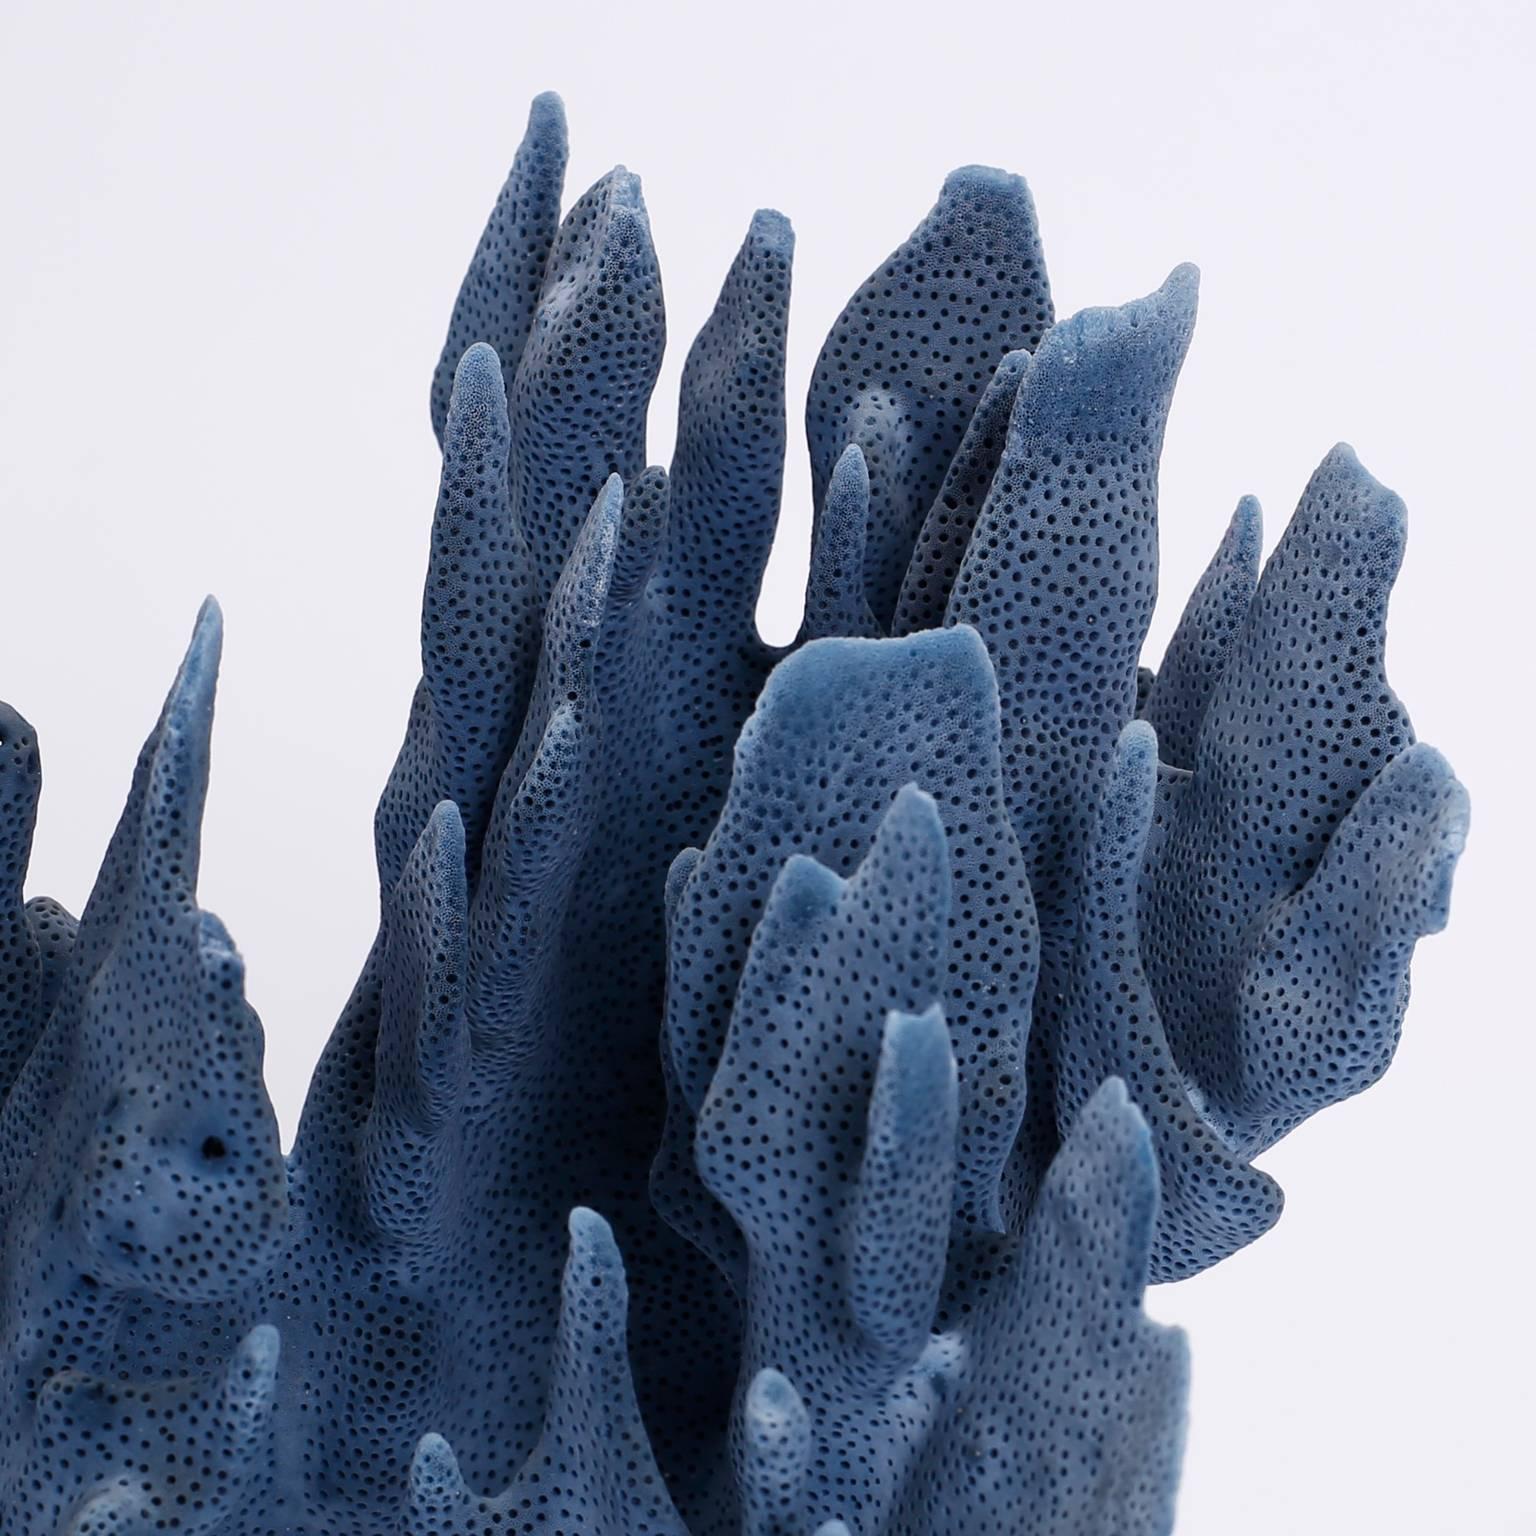 Organic Modern Blue Coral Sculptures on Lucite, Priced Individually